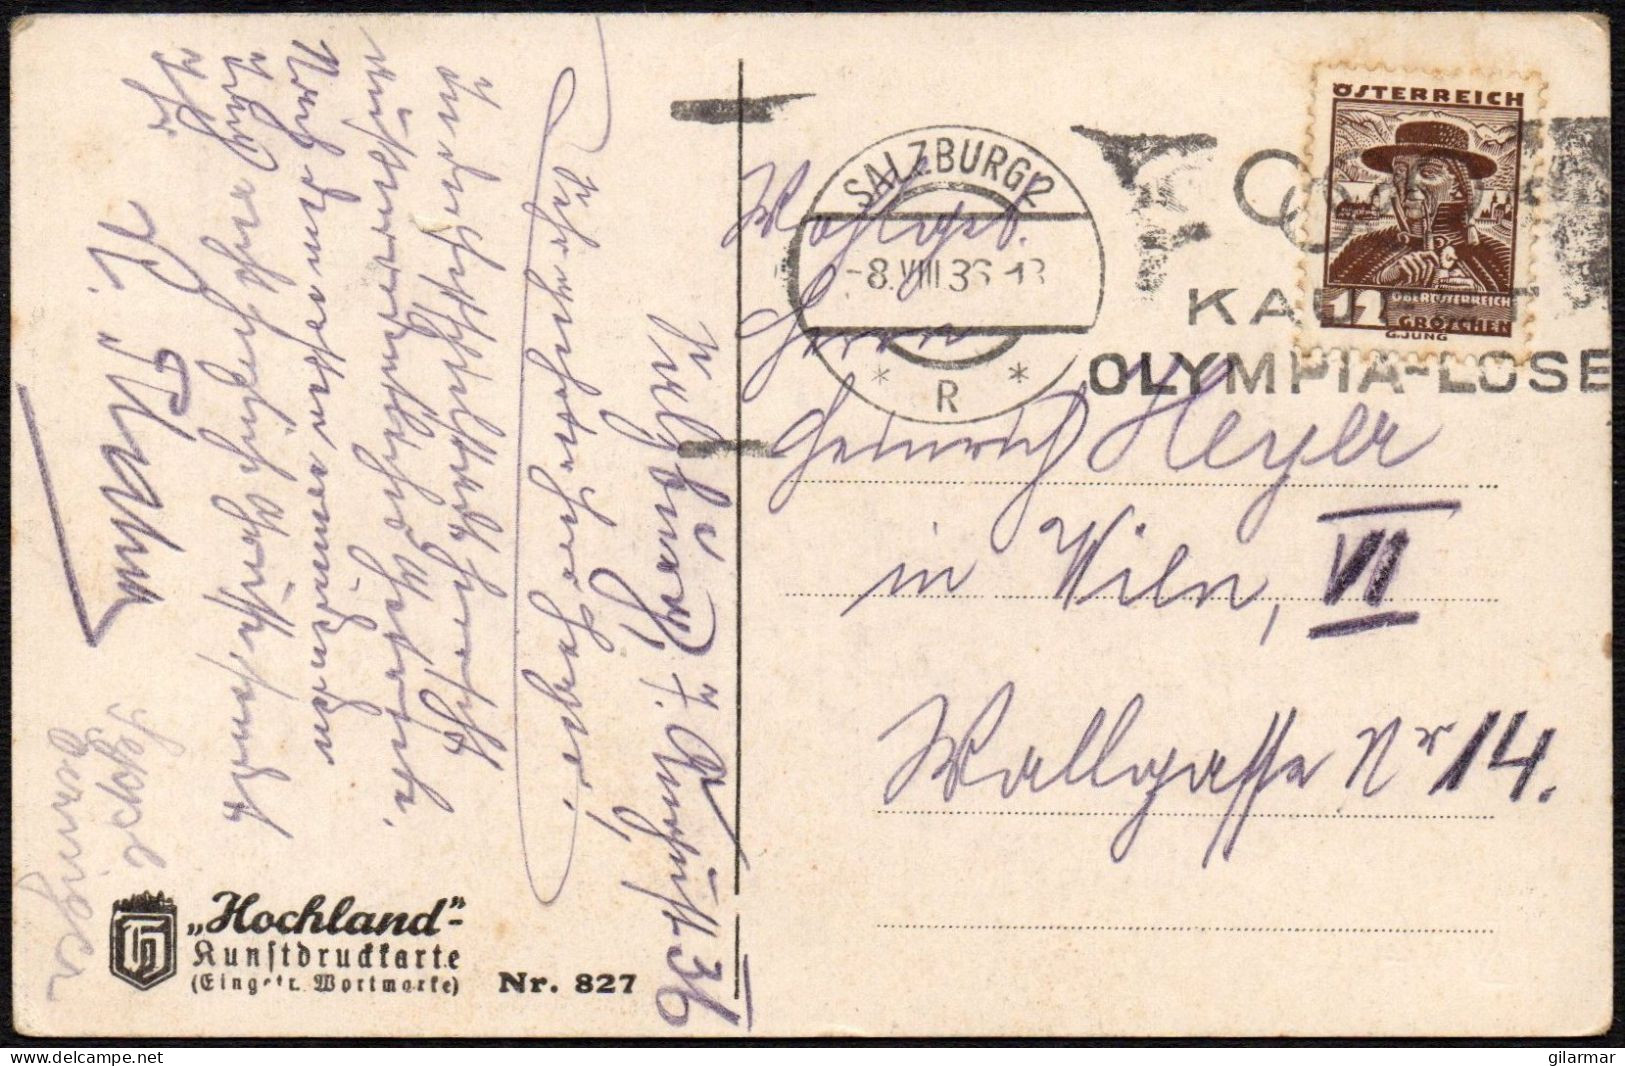 OLYMPIC GAMES 1936 - AUSTRIA SALZBURG 1936 - BUY OLYMPIC TICKETS - MAILED POSTCARD - M - Sommer 1936: Berlin